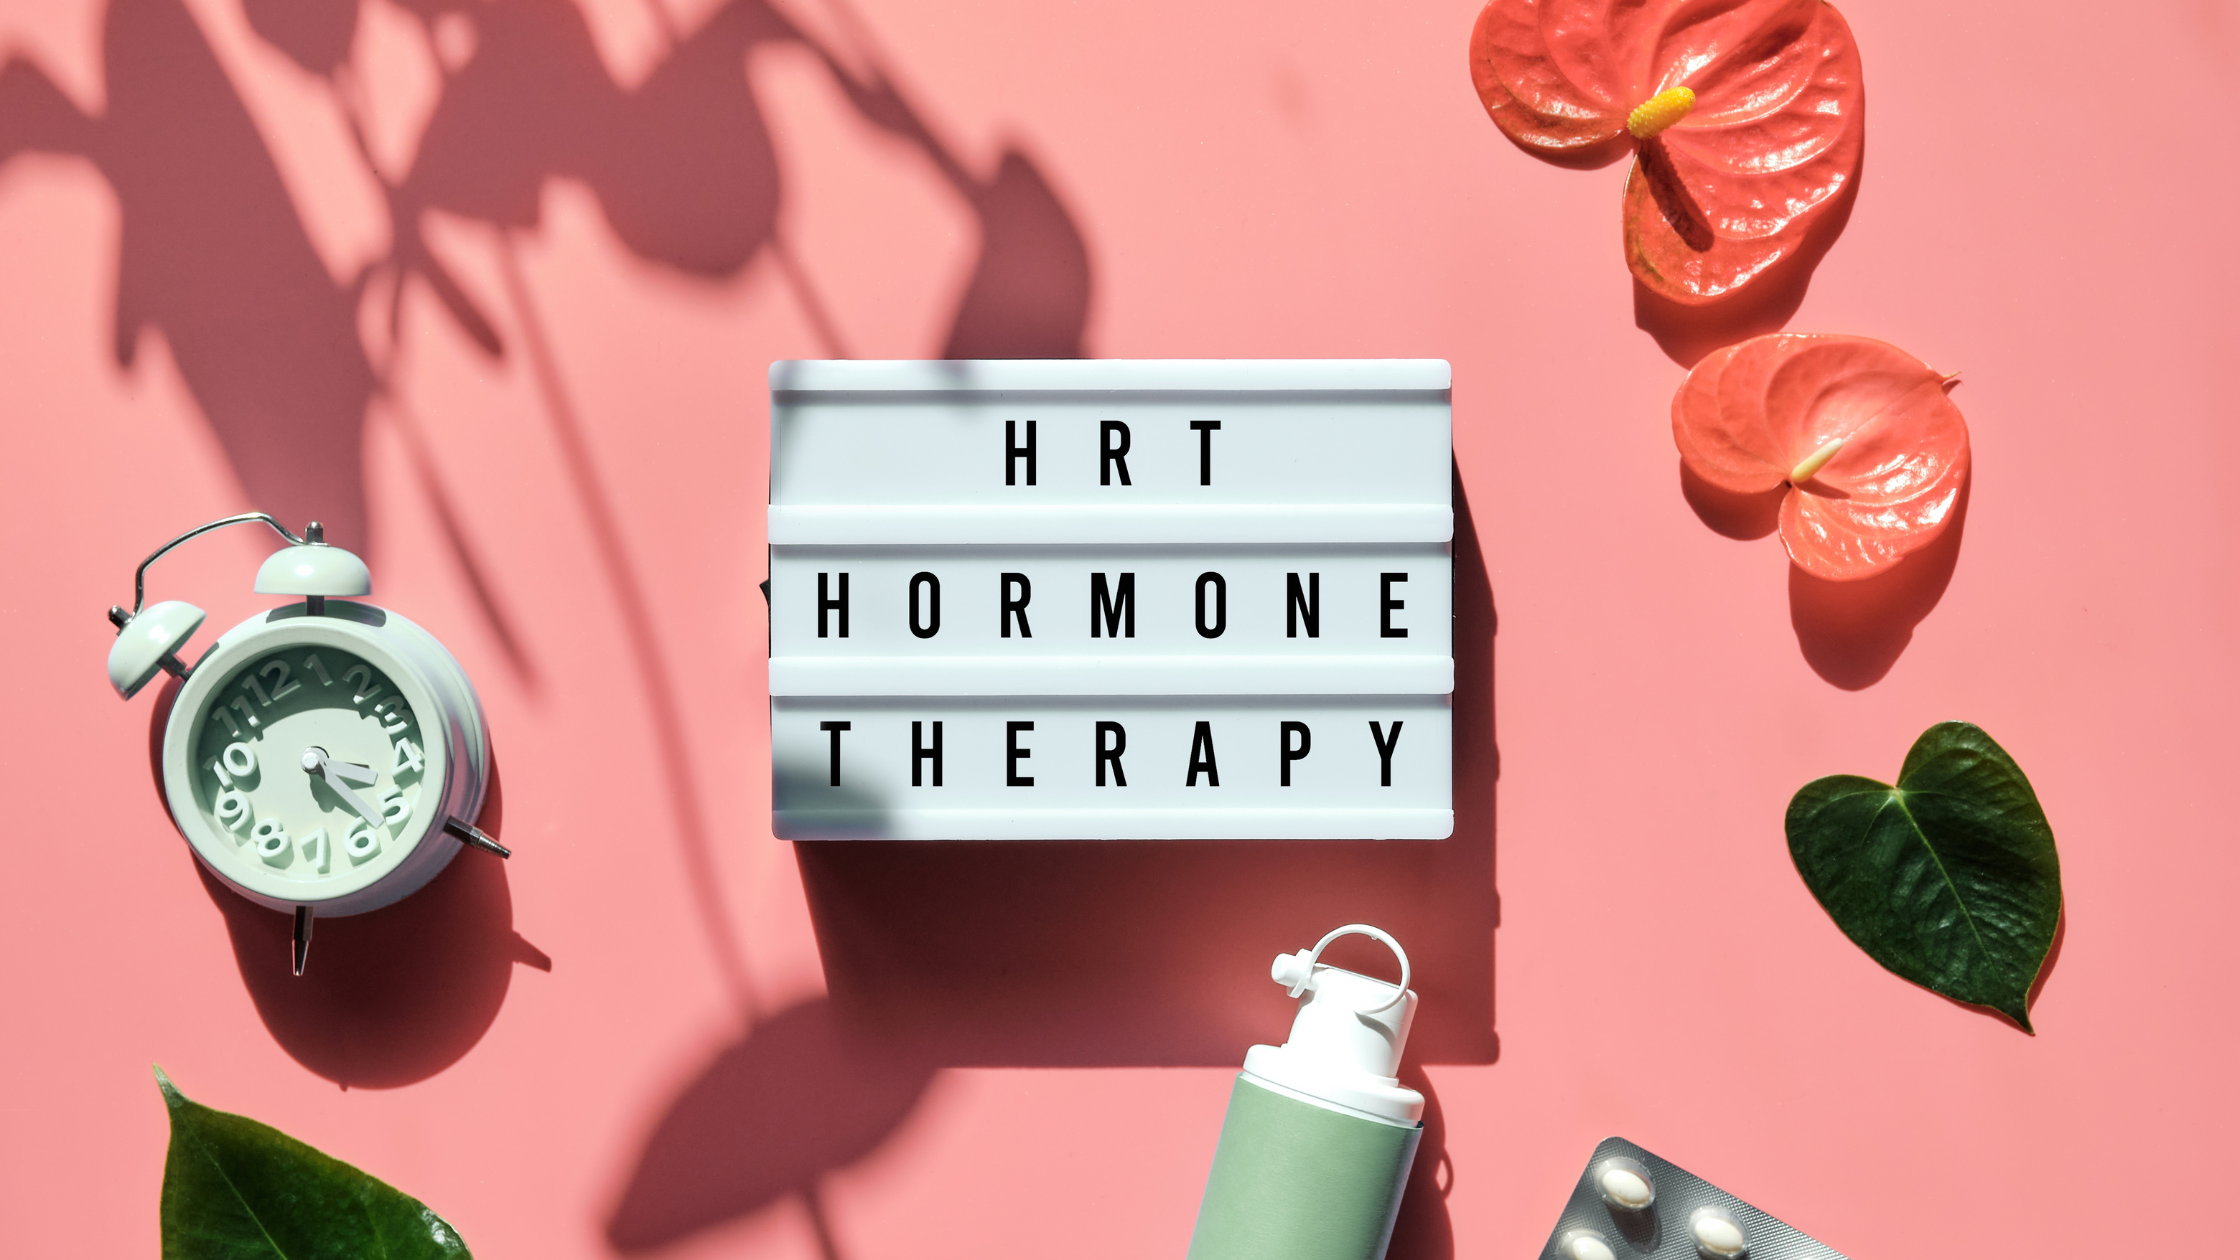 sign saying "HRT Hormone replacement therapy" surrounded by flowers and pills